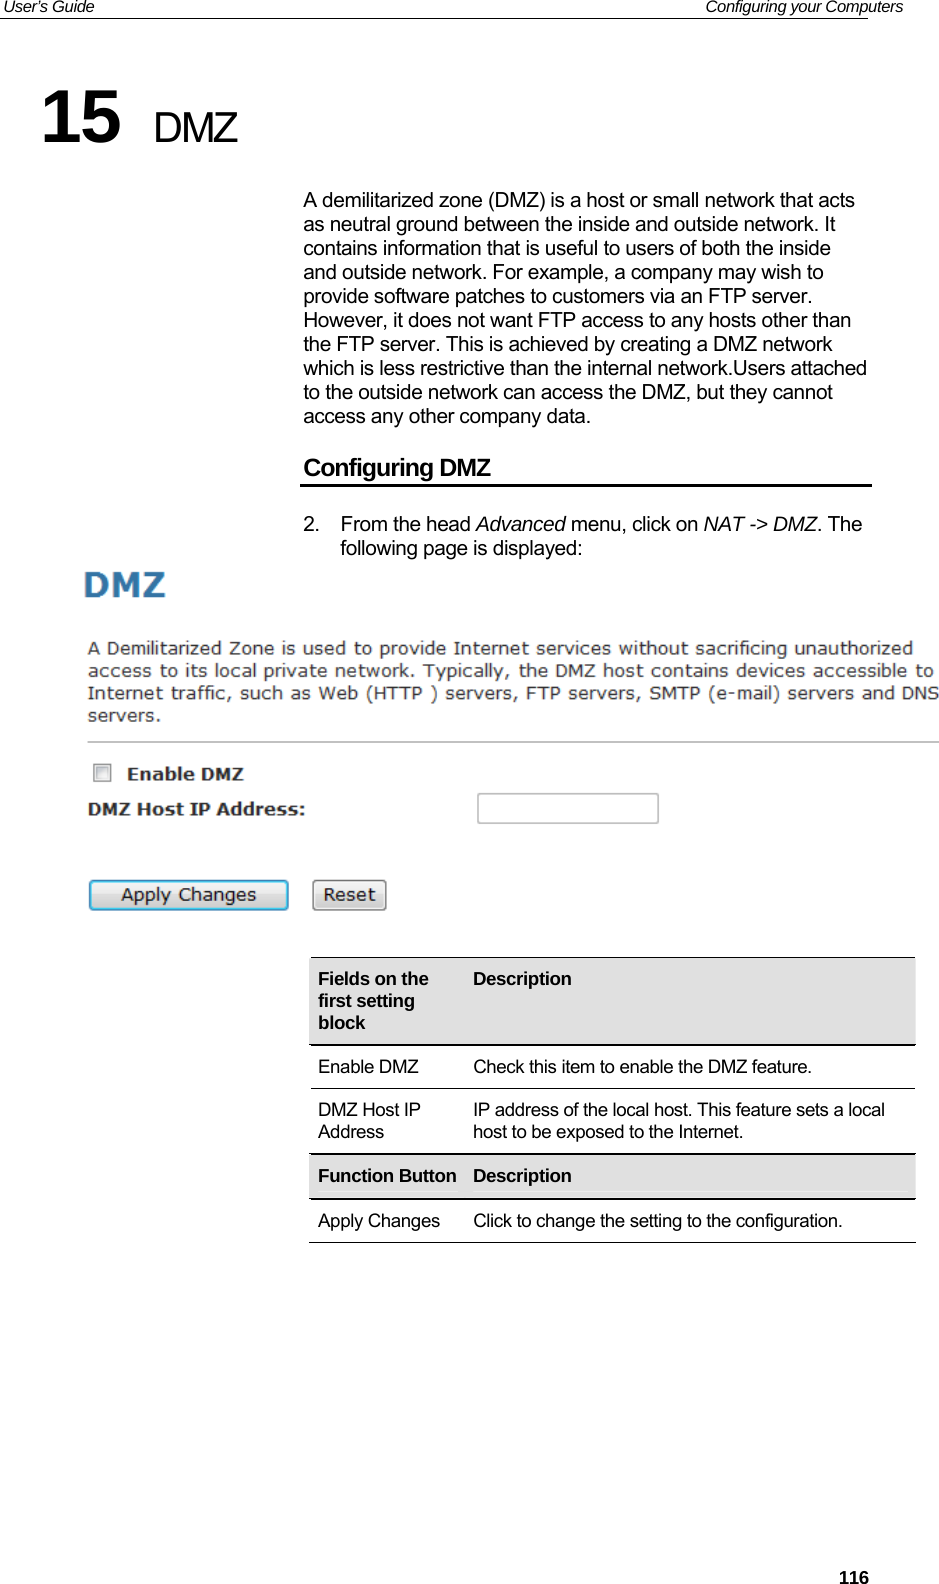 User’s Guide   Configuring your Computers 15  DMZ A demilitarized zone (DMZ) is a host or small network that acts as neutral ground between the inside and outside network. It contains information that is useful to users of both the inside and outside network. For example, a company may wish to provide software patches to customers via an FTP server. However, it does not want FTP access to any hosts other than the FTP server. This is achieved by creating a DMZ network which is less restrictive than the internal network.Users attached to the outside network can access the DMZ, but they cannot access any other company data. Configuring DMZ 2. From the head Advanced menu, click on NAT -&gt; DMZ. The following page is displayed:      Fields on the first setting block Description  Enable DMZ  Check this item to enable the DMZ feature. DMZ Host IP Address IP address of the local host. This feature sets a local host to be exposed to the Internet.      Function Button Description  Apply Changes  Click to change the setting to the configuration.           116